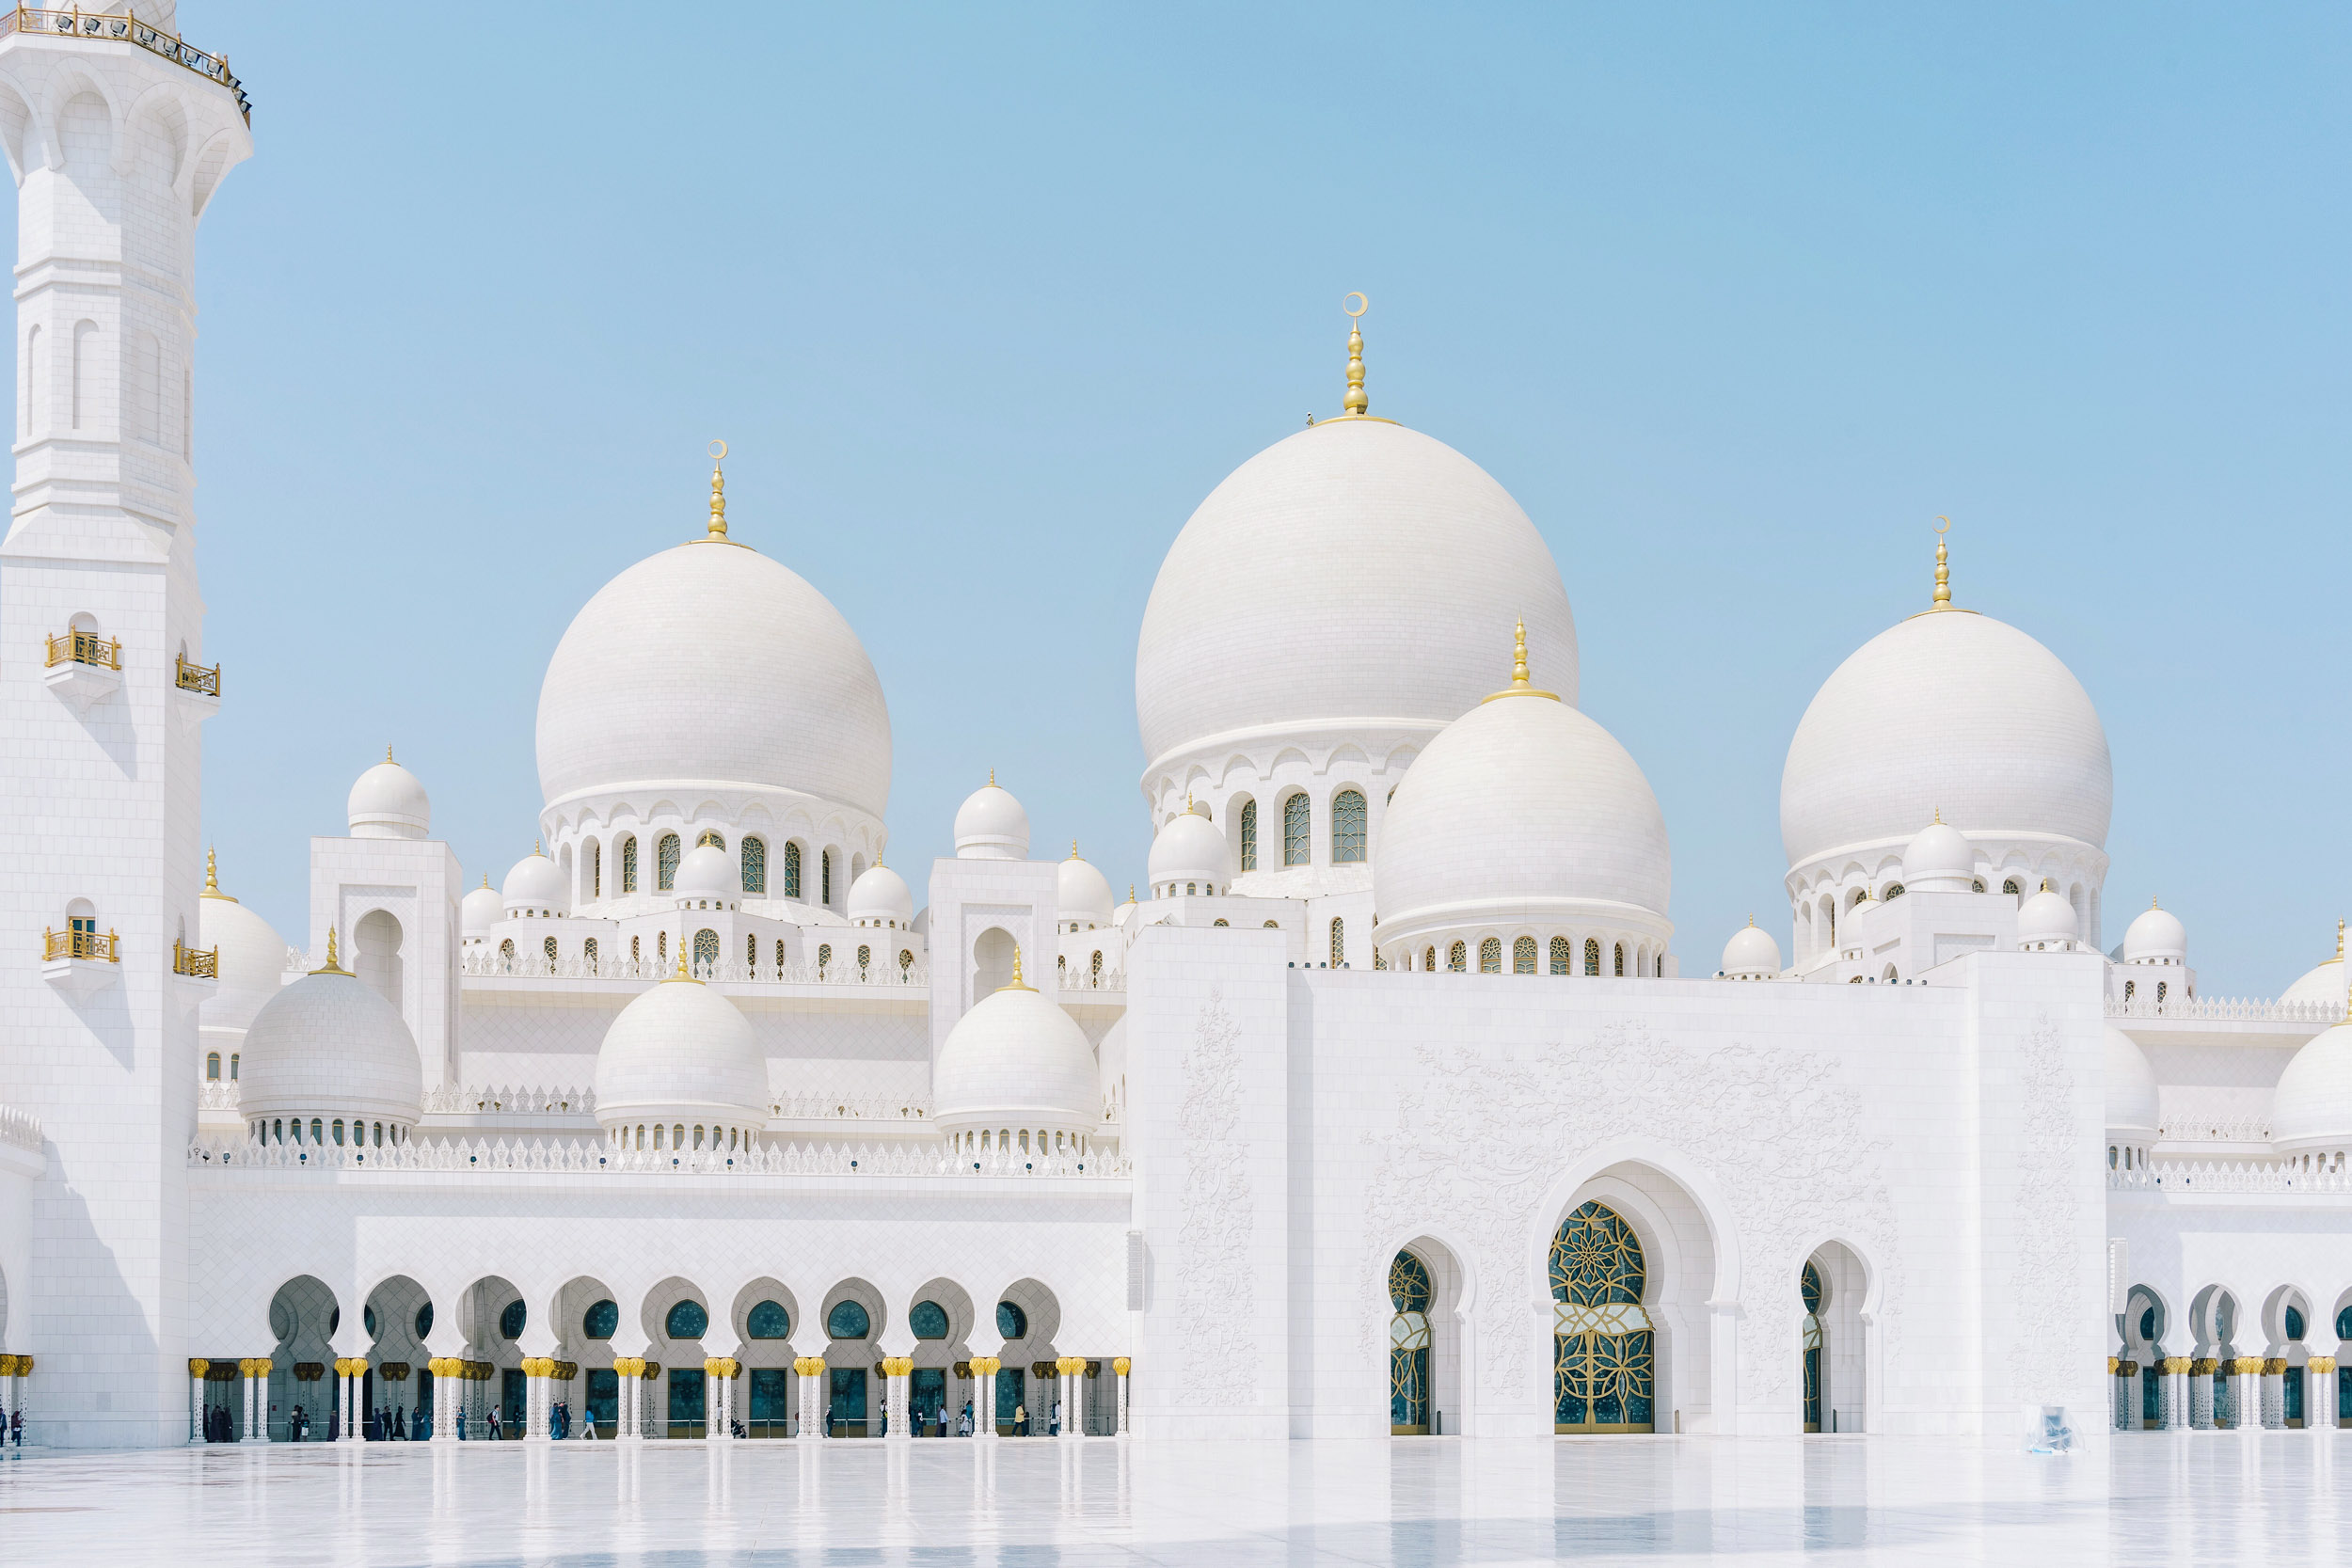 If you have plans to visit Dubai, do not miss The Sheikh Zayed Grand Mosque 